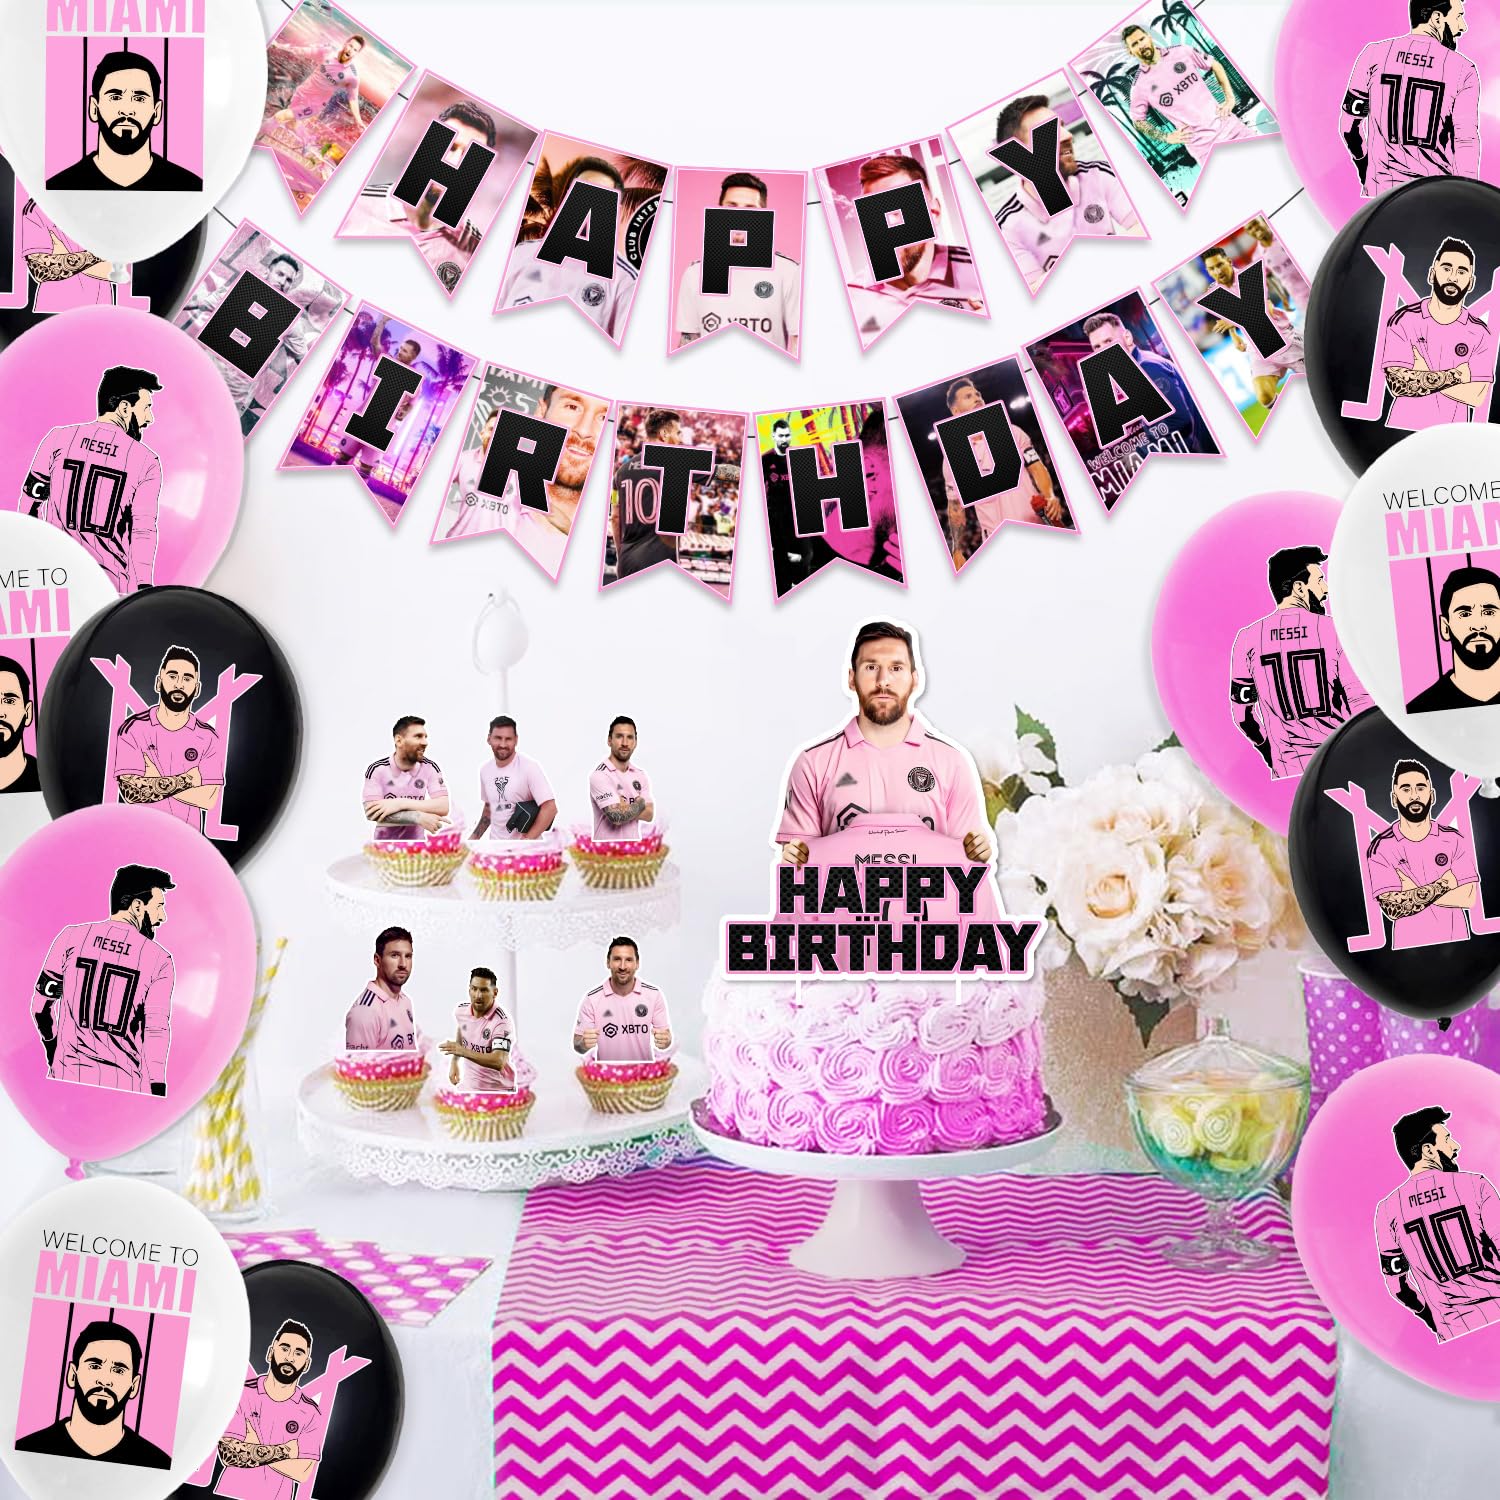 Baeccheo Football Birthday Party Decorations, Birthday Party Supplies Set Include Happy Birthday Banner, Balloons, Cake Topper and Cupcake Toppers for Boys Girls Football Themed Birthday